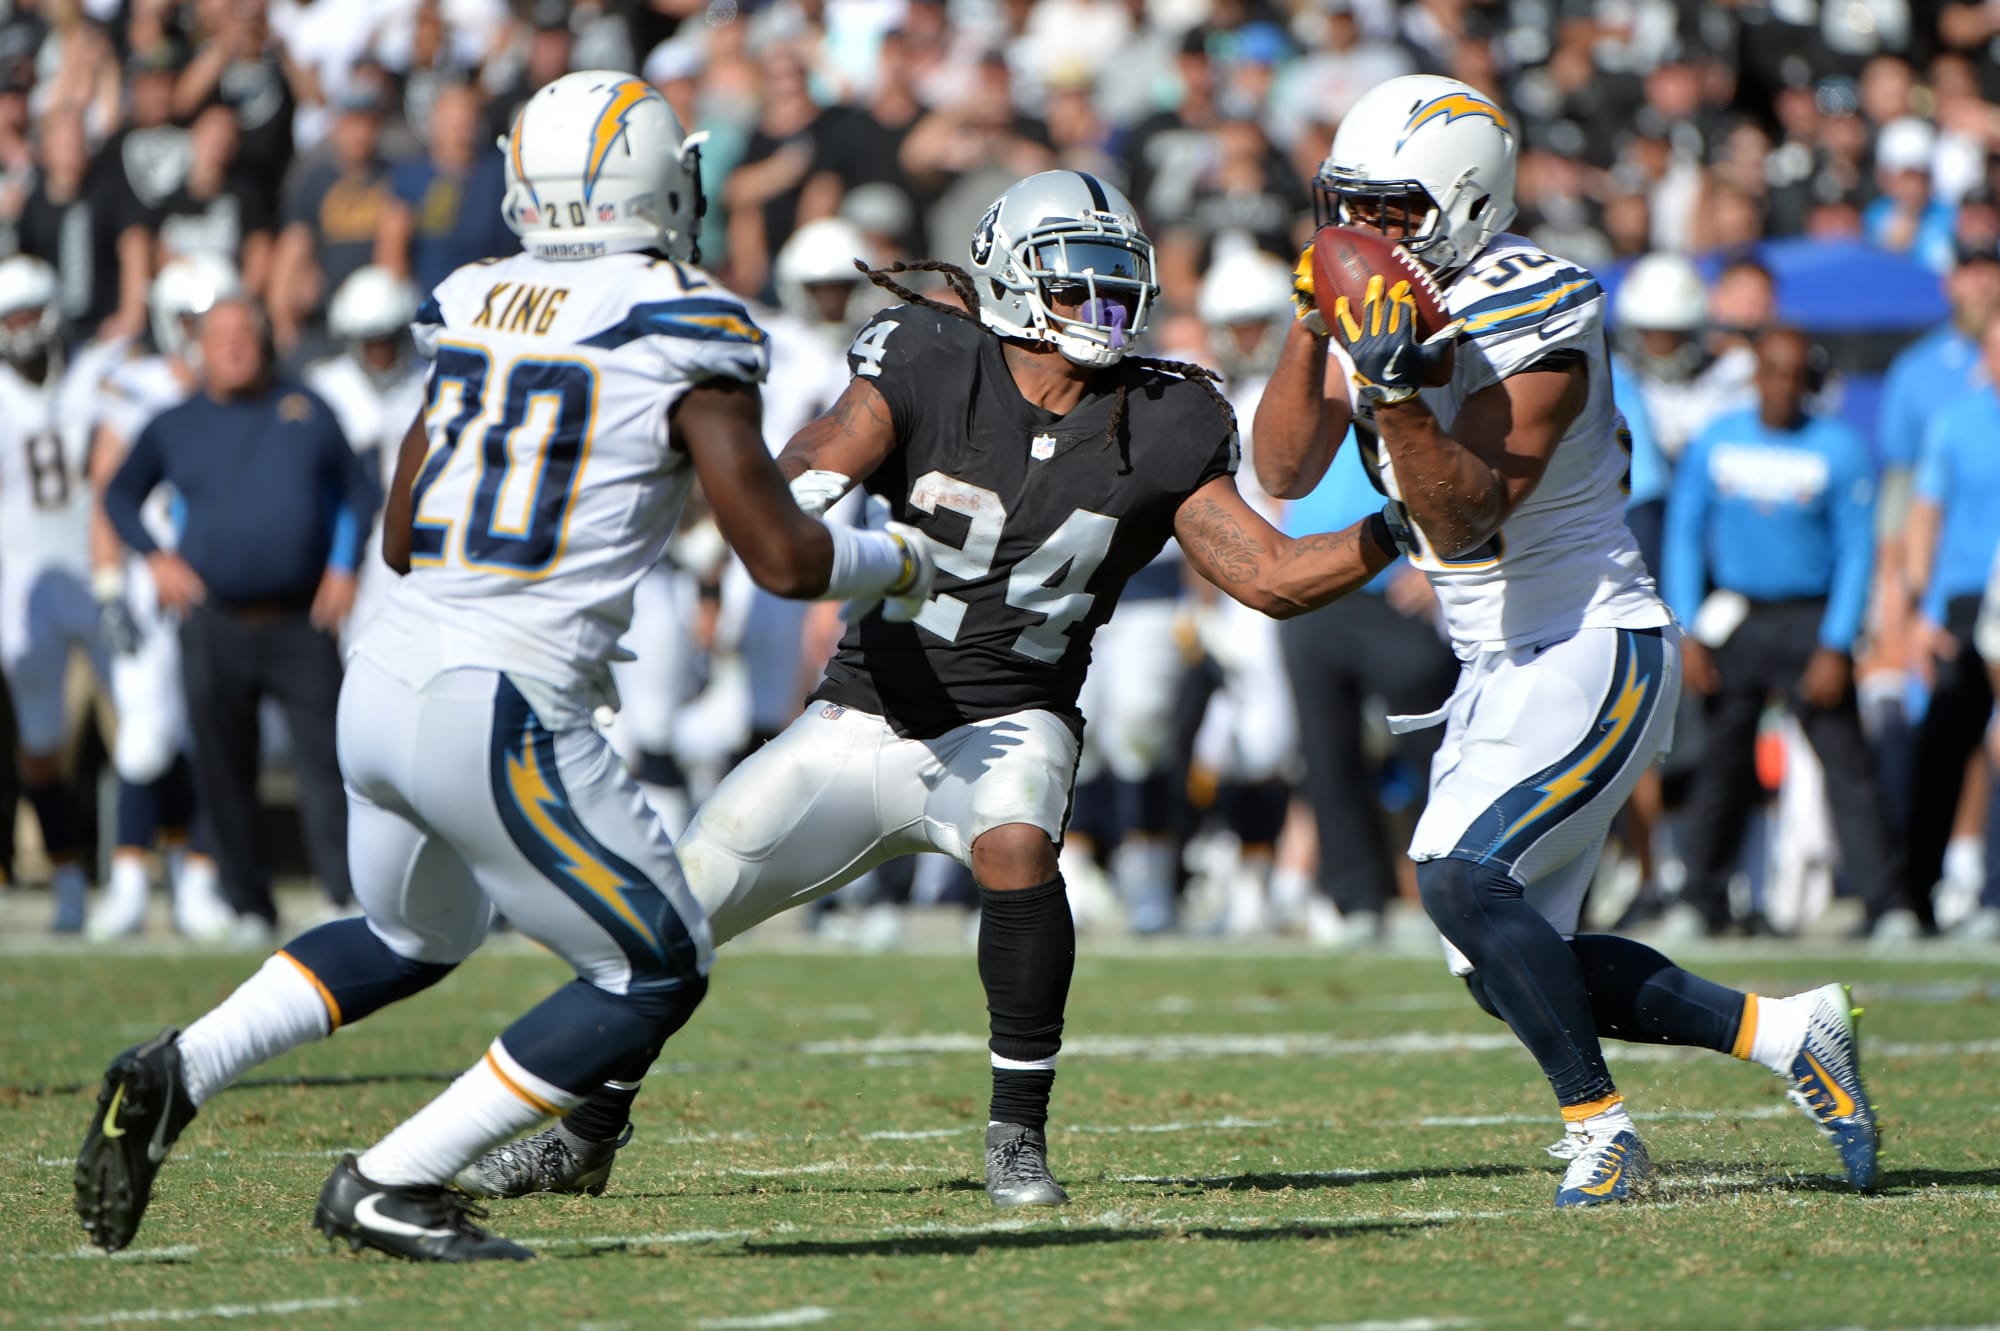 Chargers vs Raiders Highlights, game tracker and more